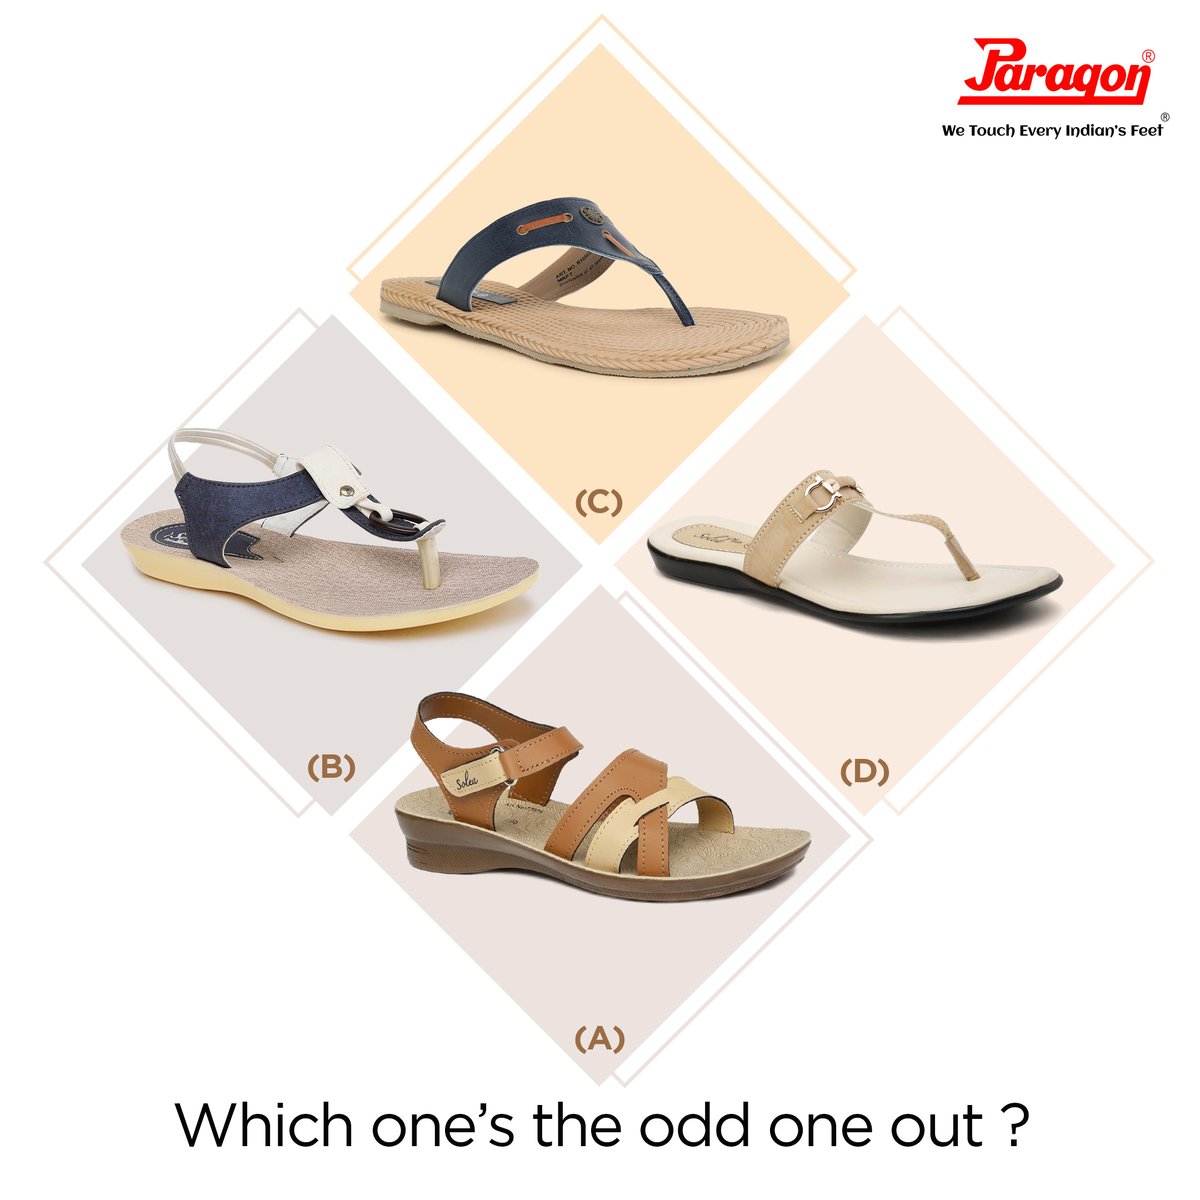 Guess which  one is  odd one out and let us know in the comments below. 

#Paragon #Footwear #Paragonfootwear #Comfort #Style #WeTouchEveryIndiansFee #quiz #quizoftheday  #brainquiz #solvetheunscramble #solvethegame #brainteaser #quiztime #emoji #guesstheemoji #emojigame